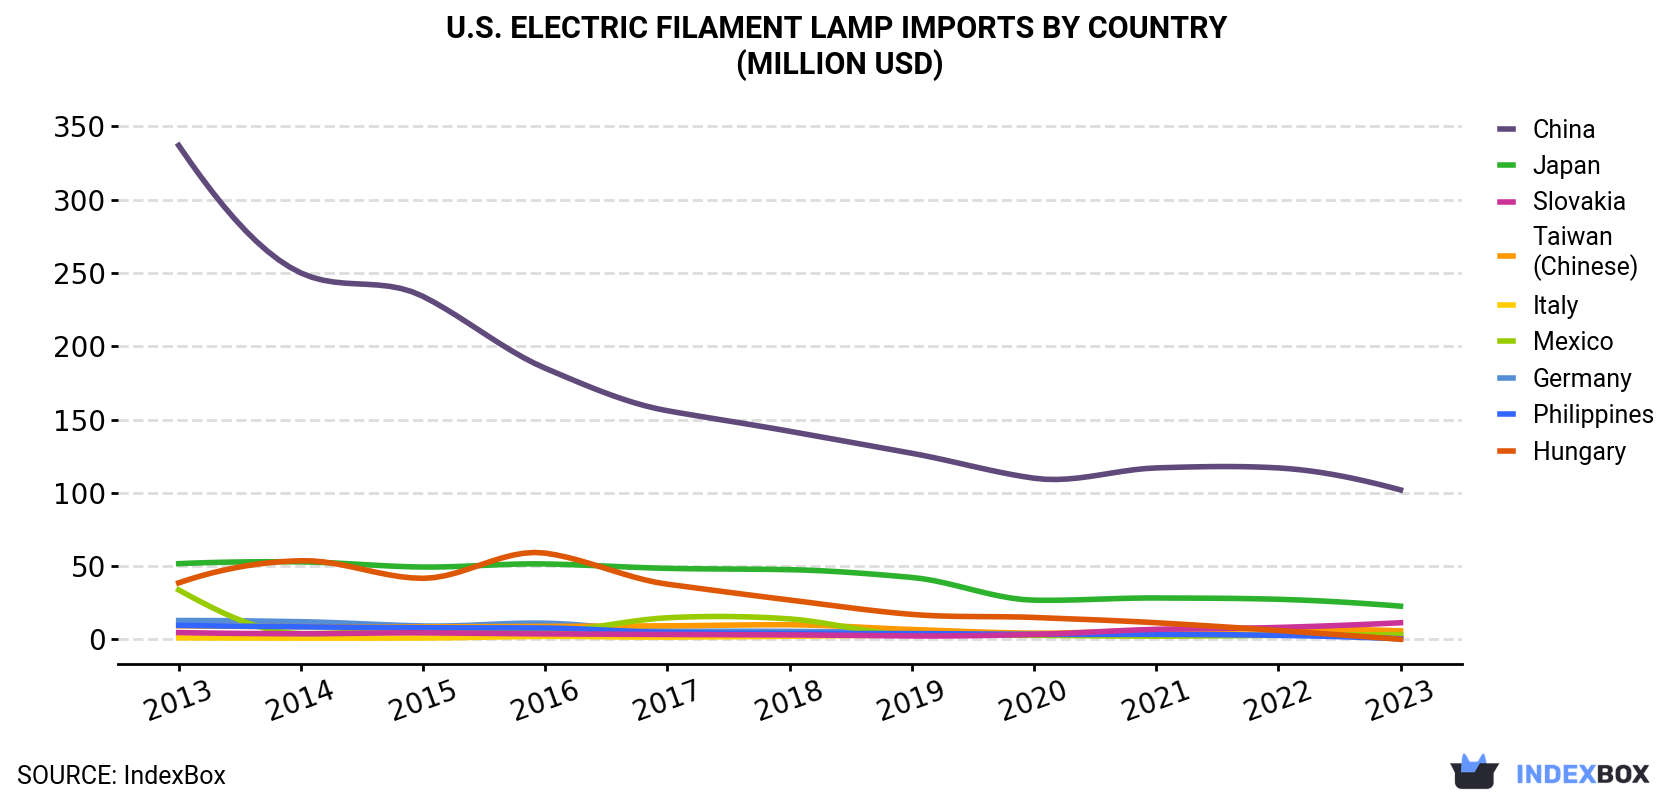 U.S. Electric Filament Lamp Imports By Country (Million USD)